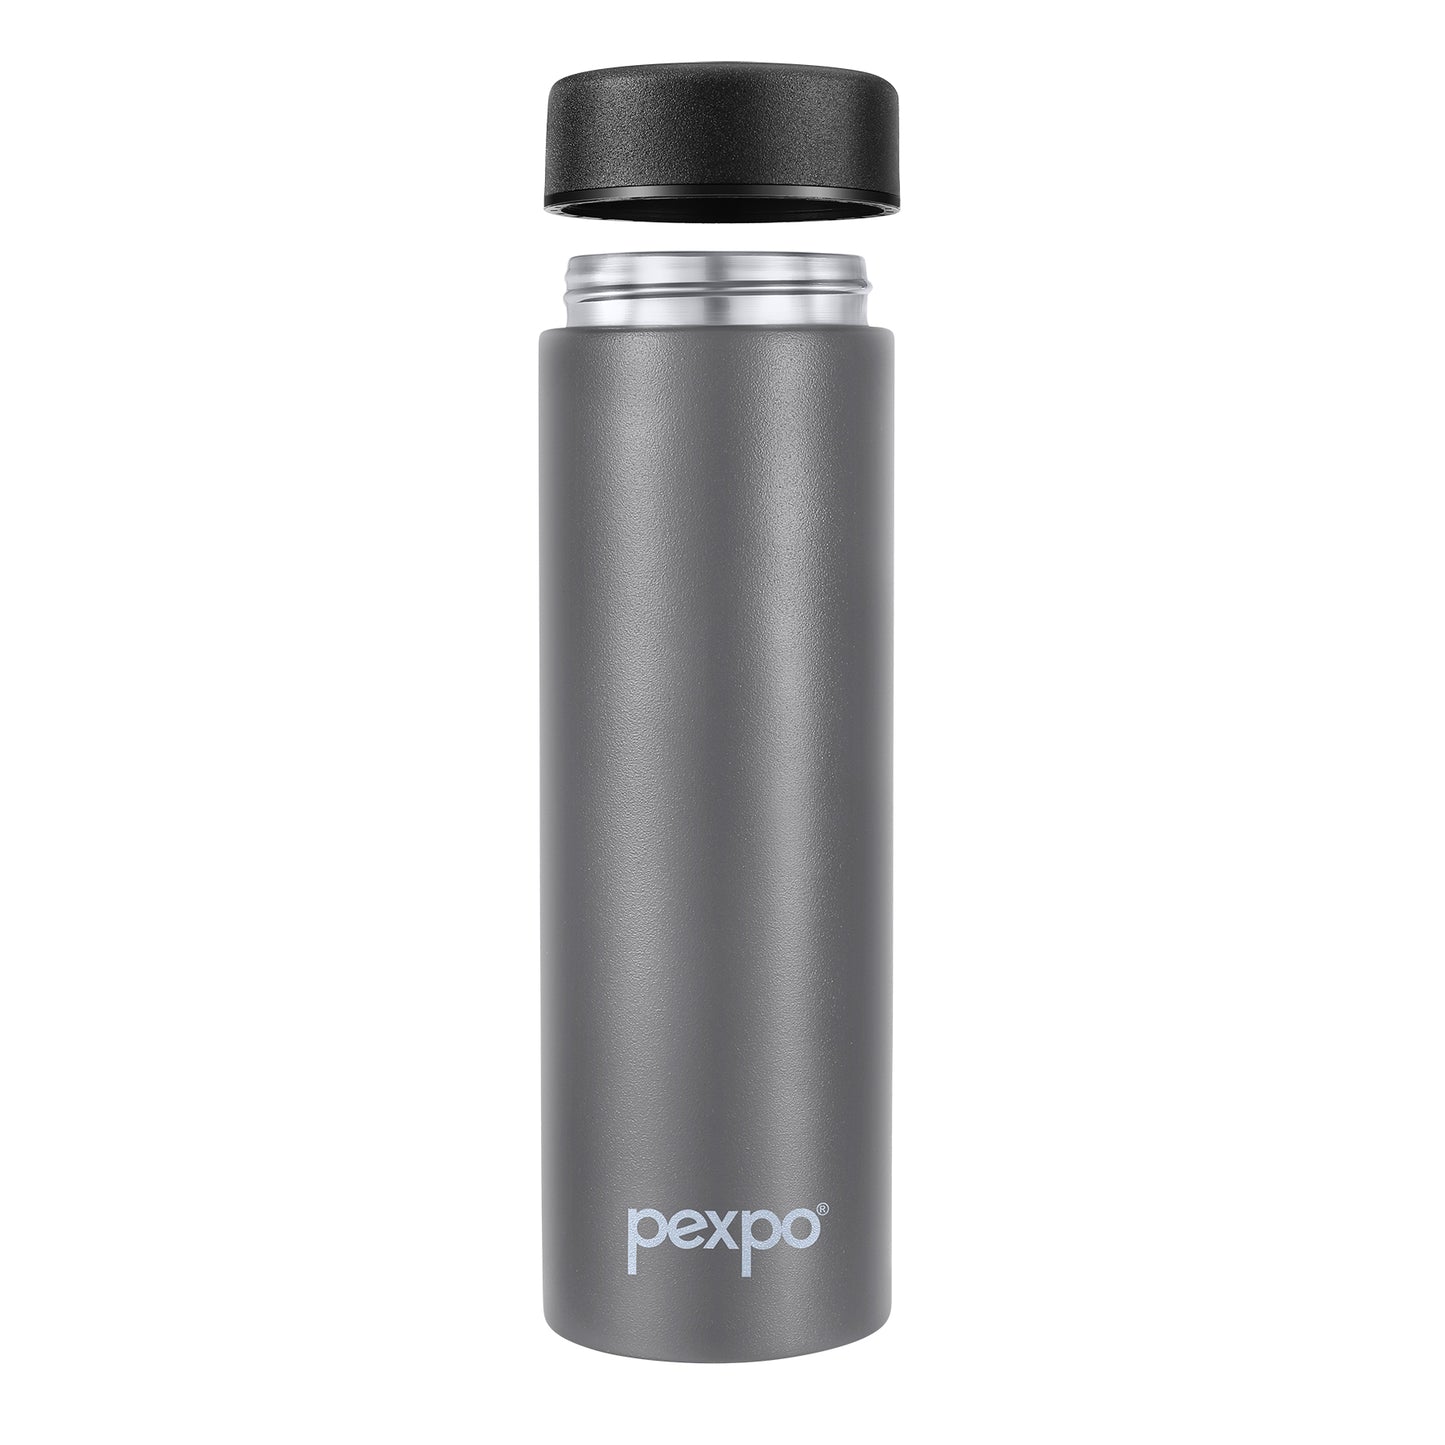 Pexpo Titanium- Stainless Steel Hot and Cold Vacuum Insulated Flask |  BPA Free & Keeps Drinks Hot/Cold for 24+ Hours